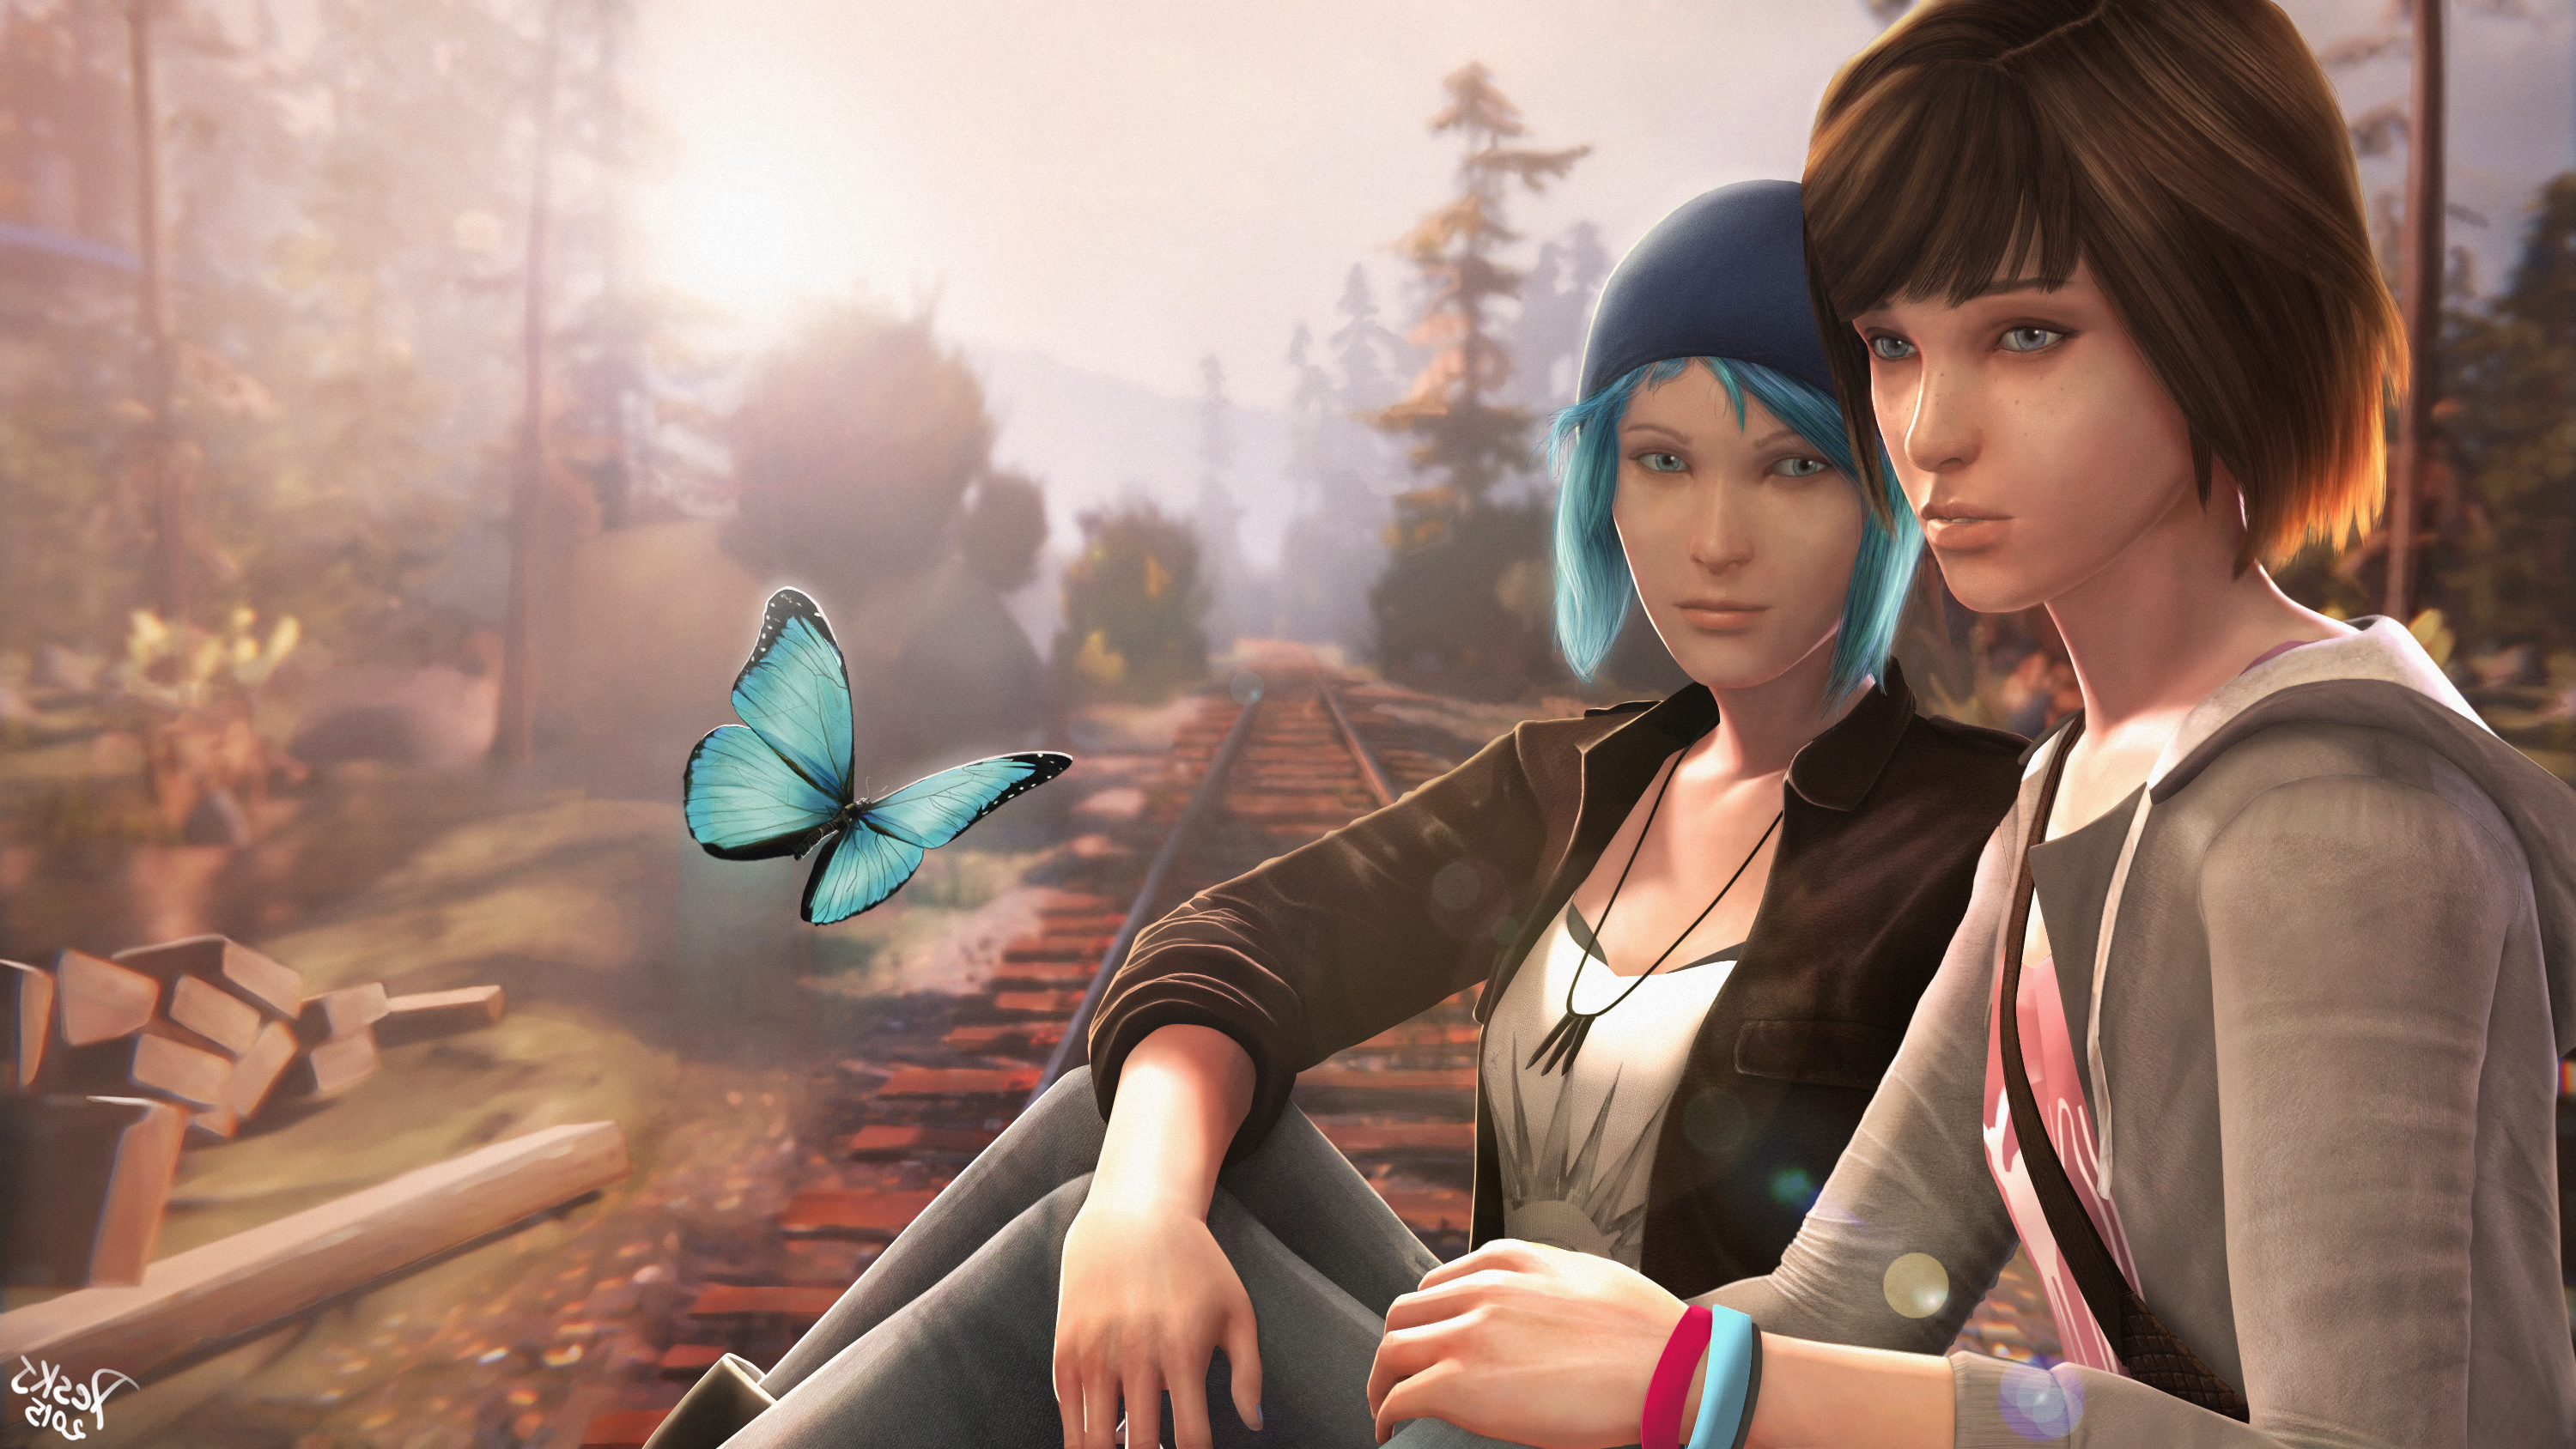 General 3000x1688 Max Caulfield Chloe Price Life Is Strange Arcadia Bay video games video game characters Square Enix